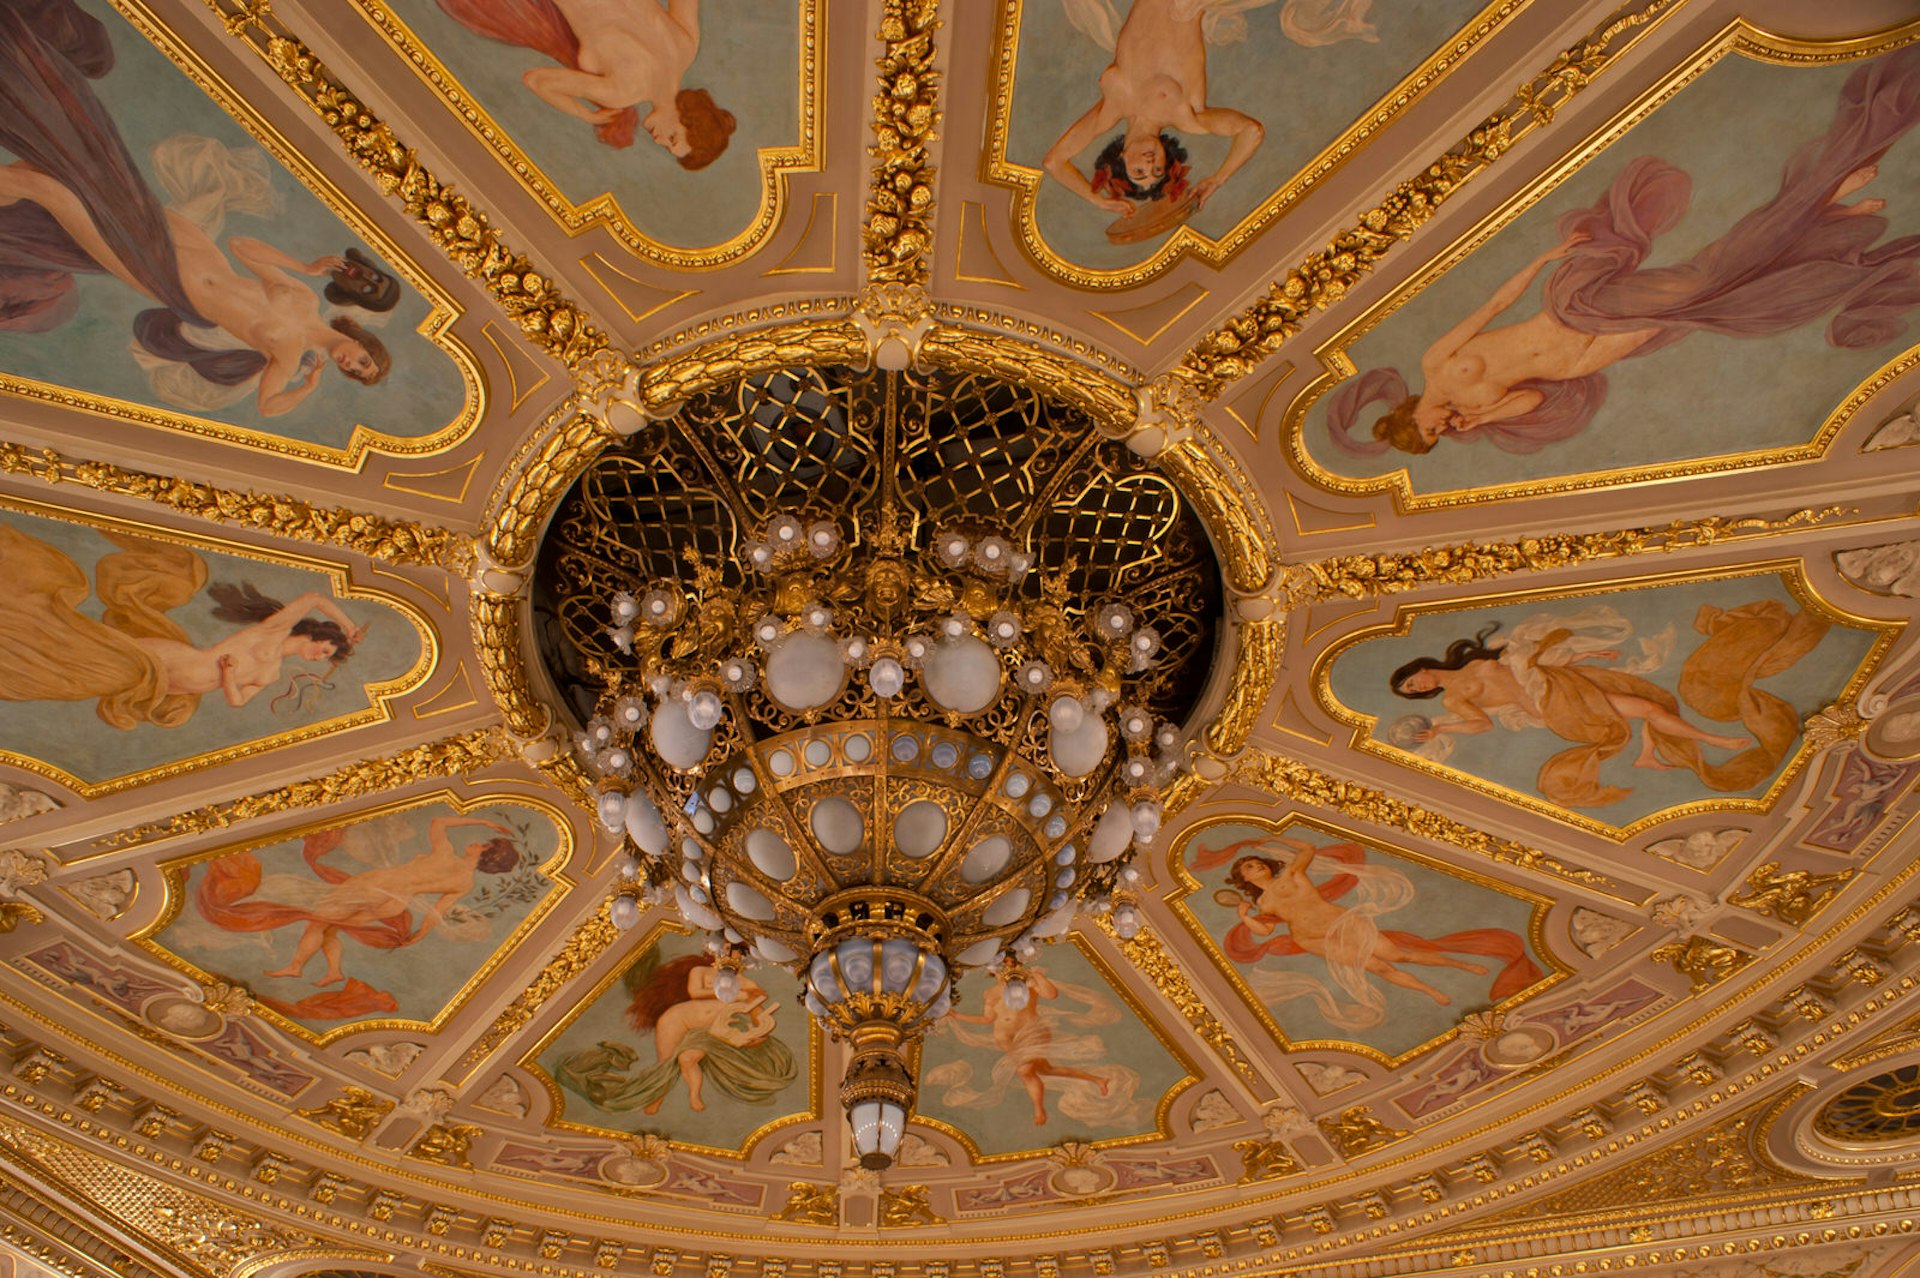 The ornate ceiling of the Lviv Theatre of Opera and Ballet © eFesenko / Shutterstock